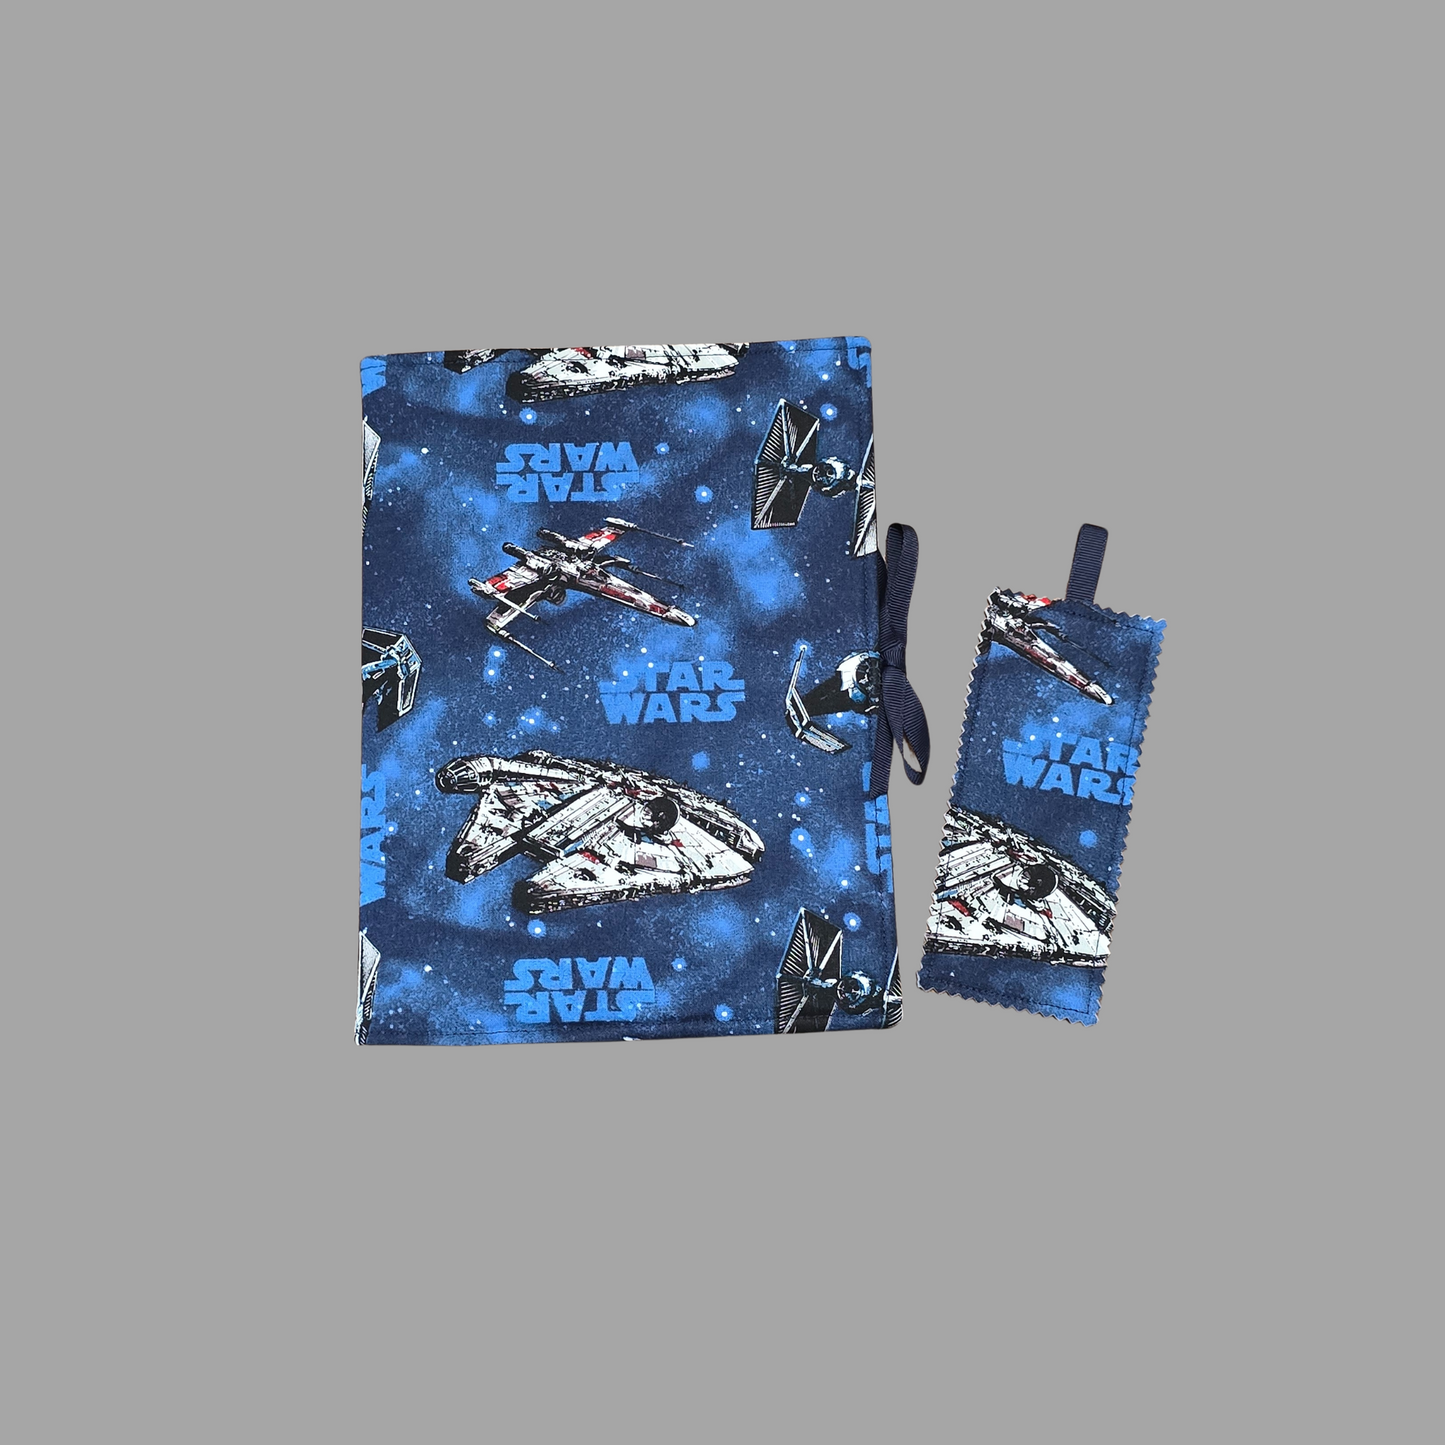 Star Wars Notebook Composition Book Cover Troopers School Office Journal Diary